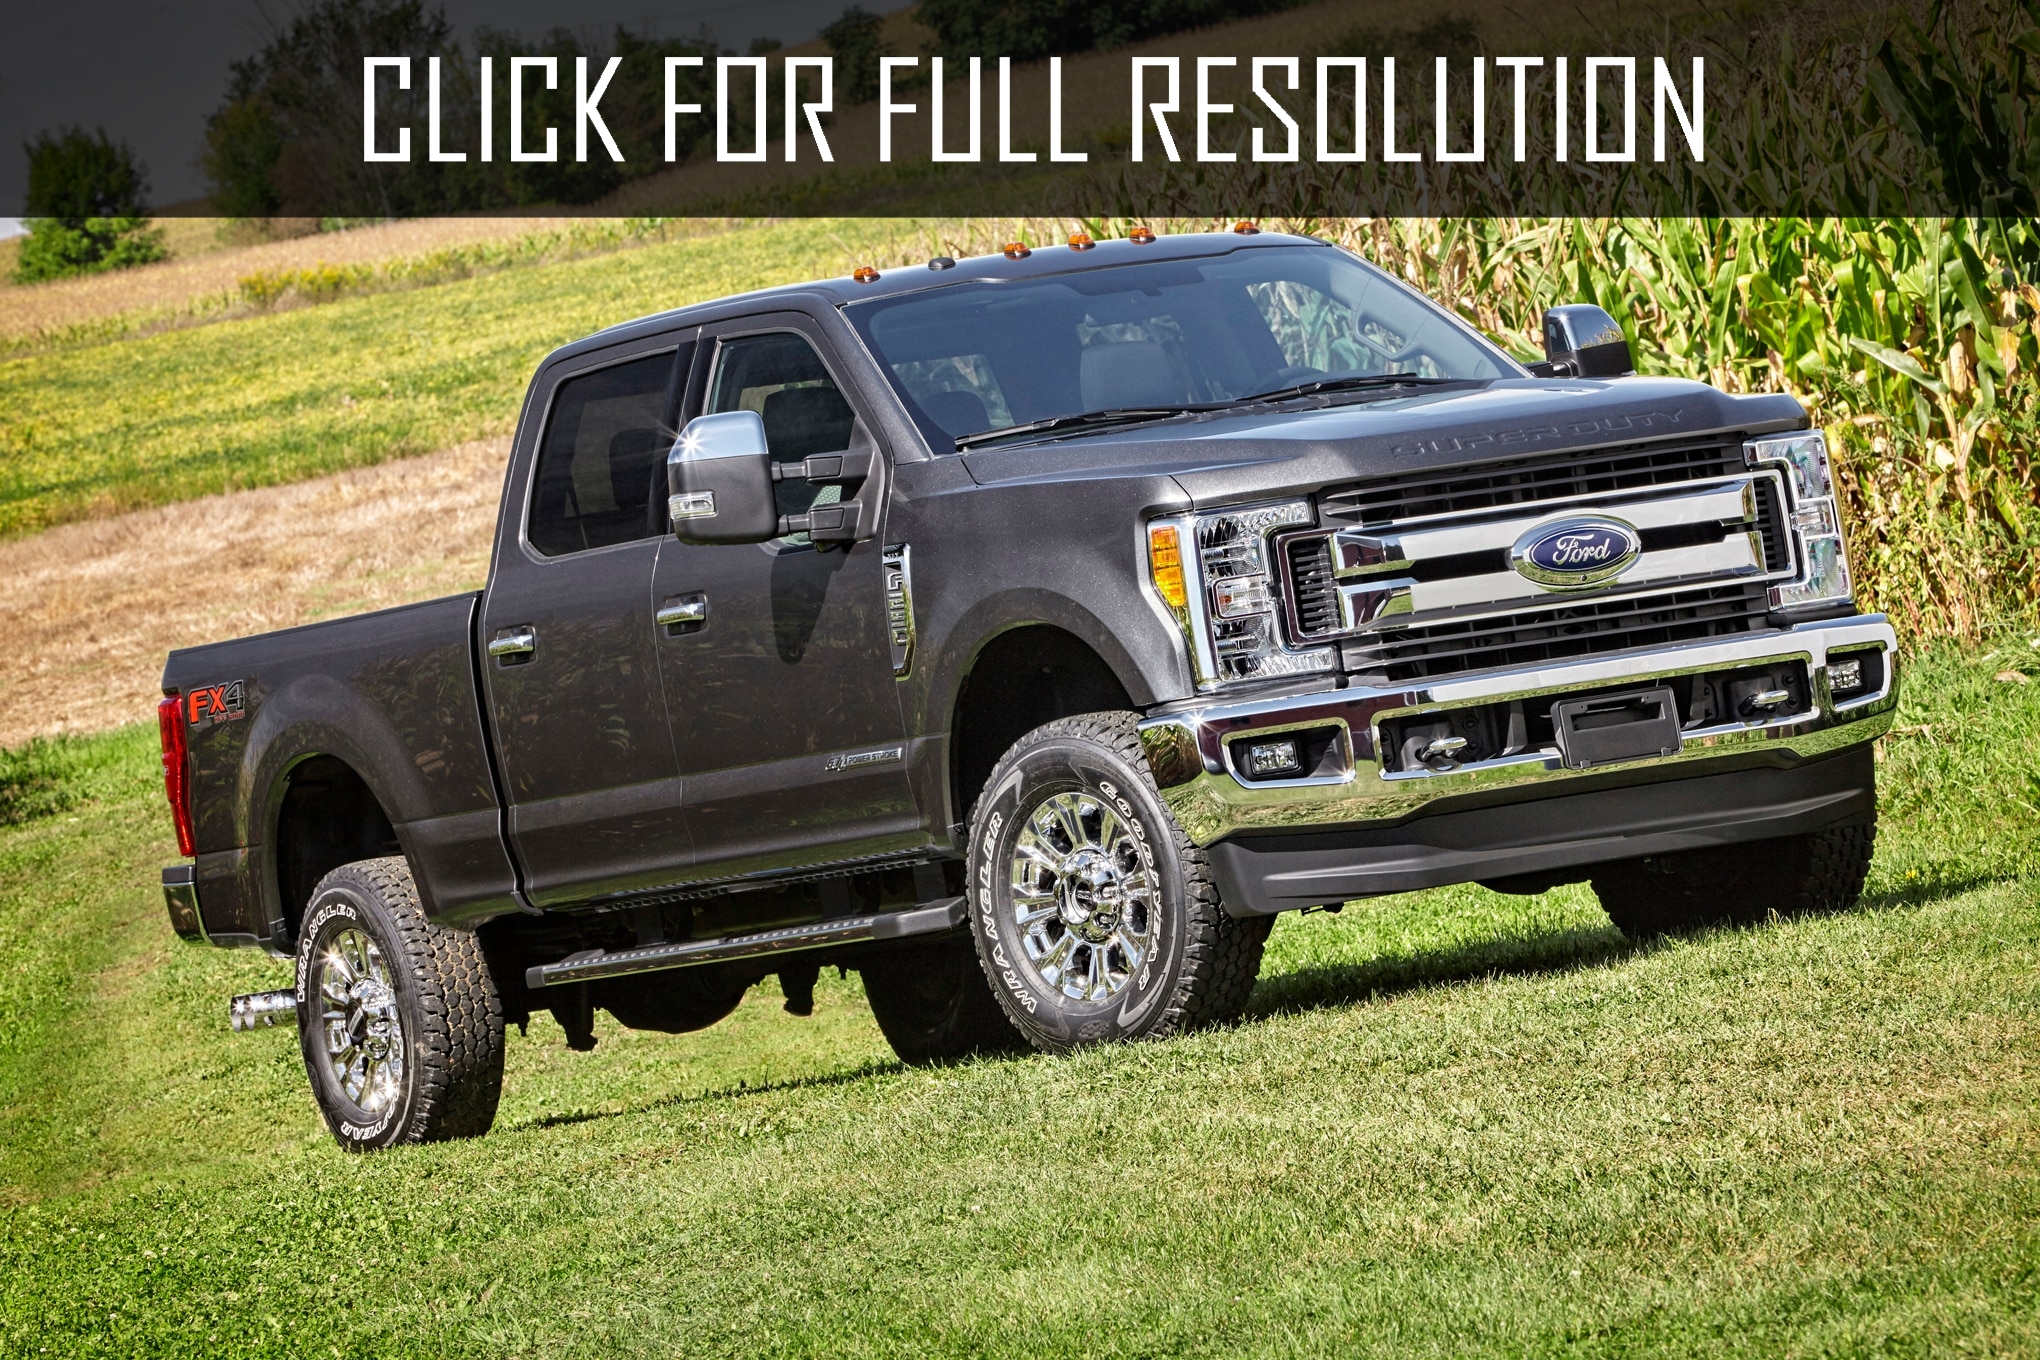 Ford F250 Xlt Super Duty amazing photo gallery, some information and